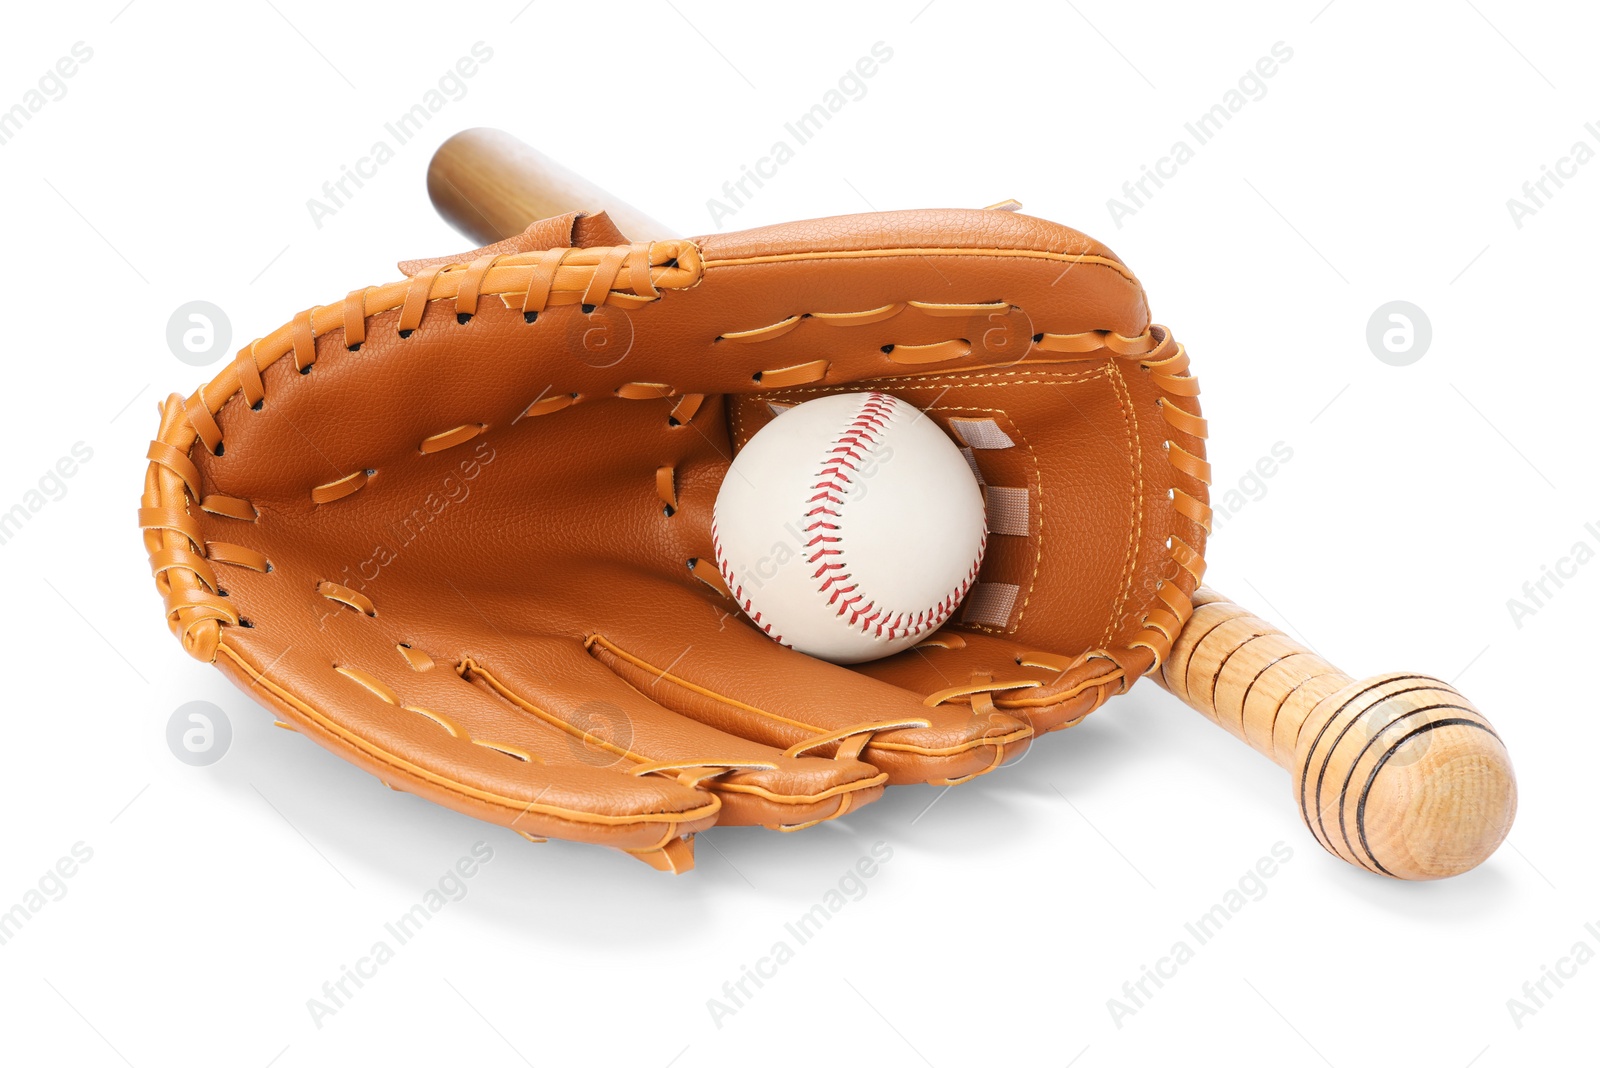 Photo of Wooden baseball bat, ball and glove isolated on white